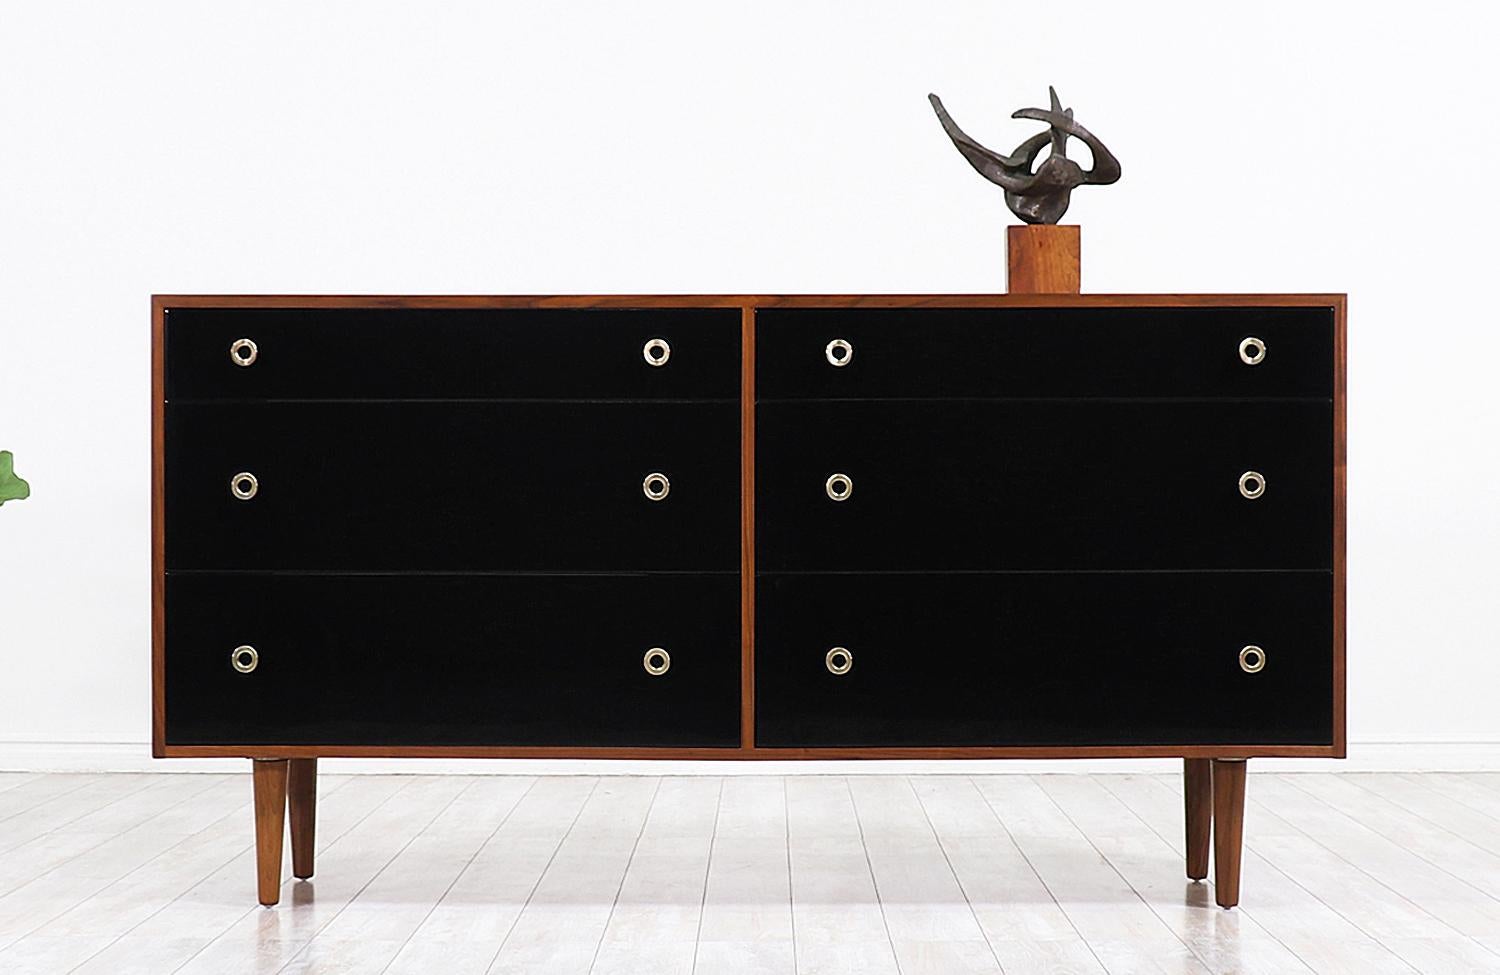 Elegant lacquered dresser designed by Swedish architect Greta M. Grossman for Glenn of California in the United States circa 1950s. This original and iconic modern design is comprised of a walnut wood case that sits on four tapered legs featuring